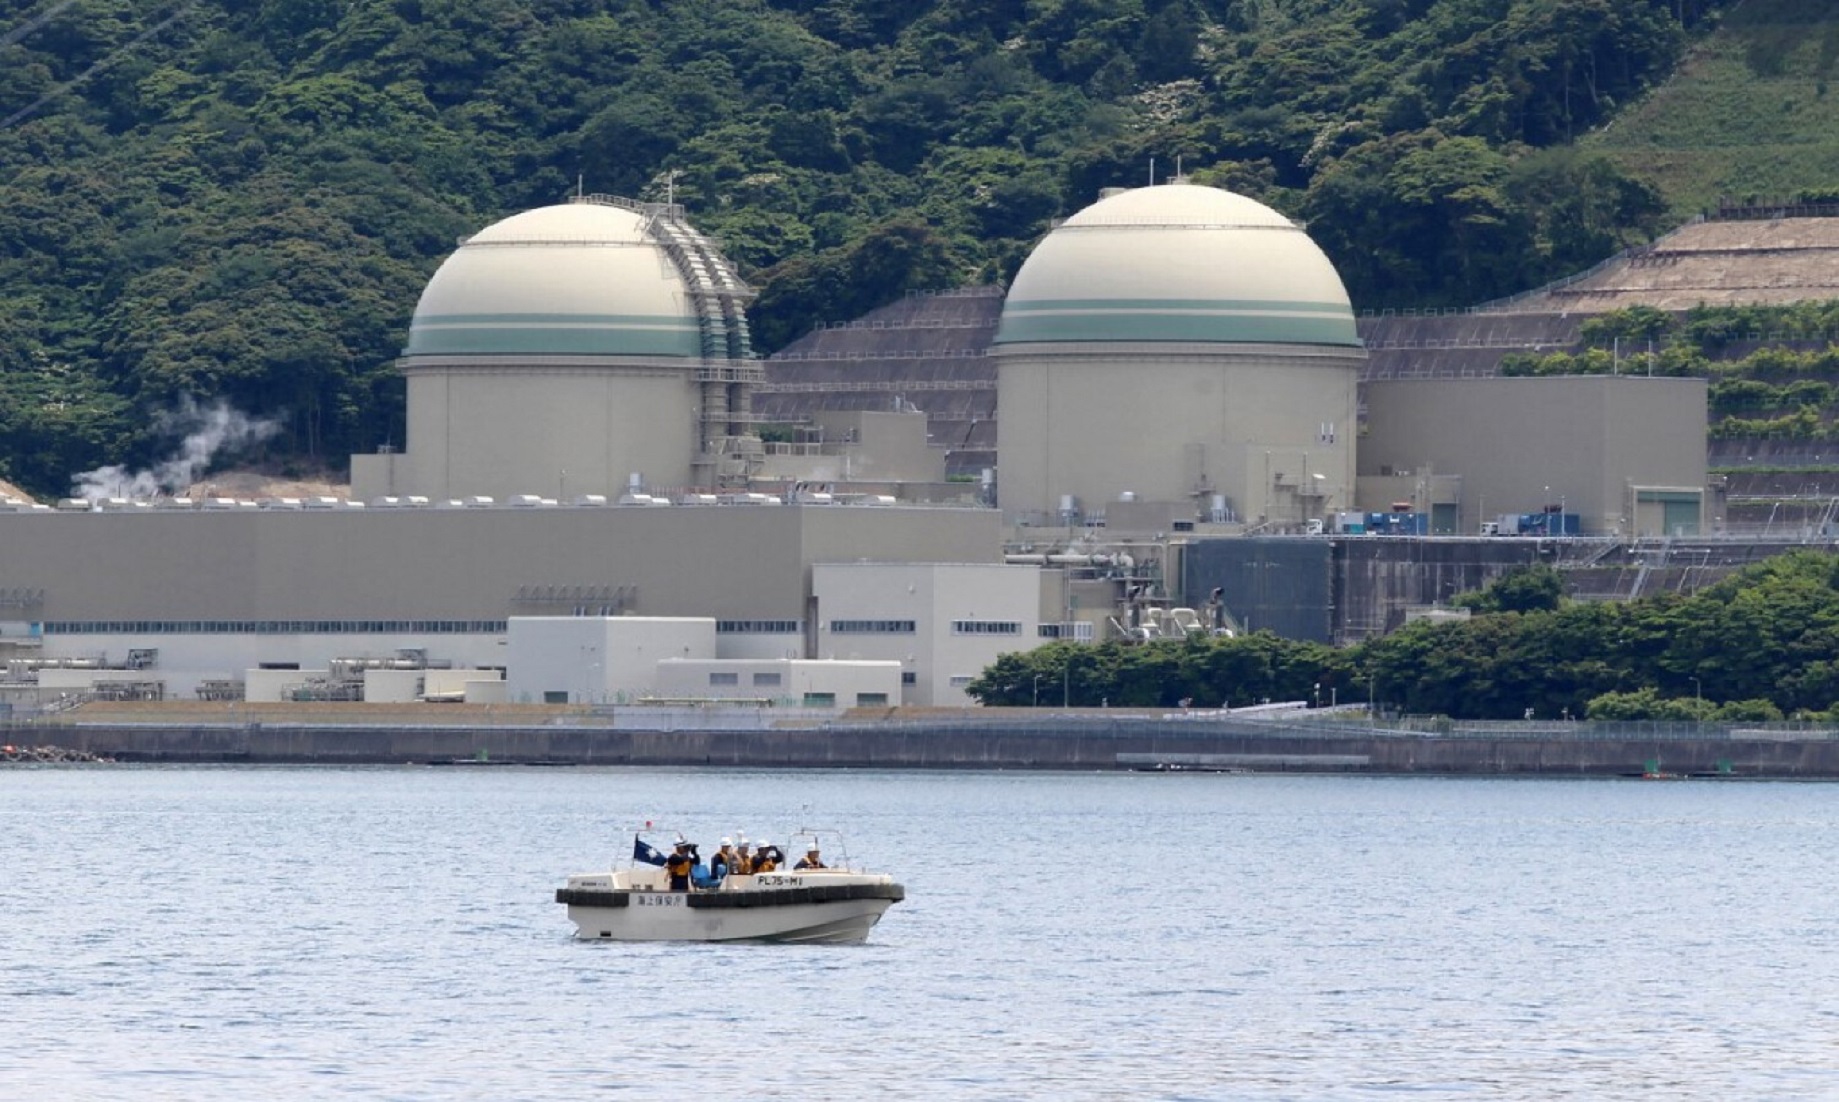 Japan’s Aged Mihama Nuke Plant Goes Online Despite 40-Year Limit, Local Fears